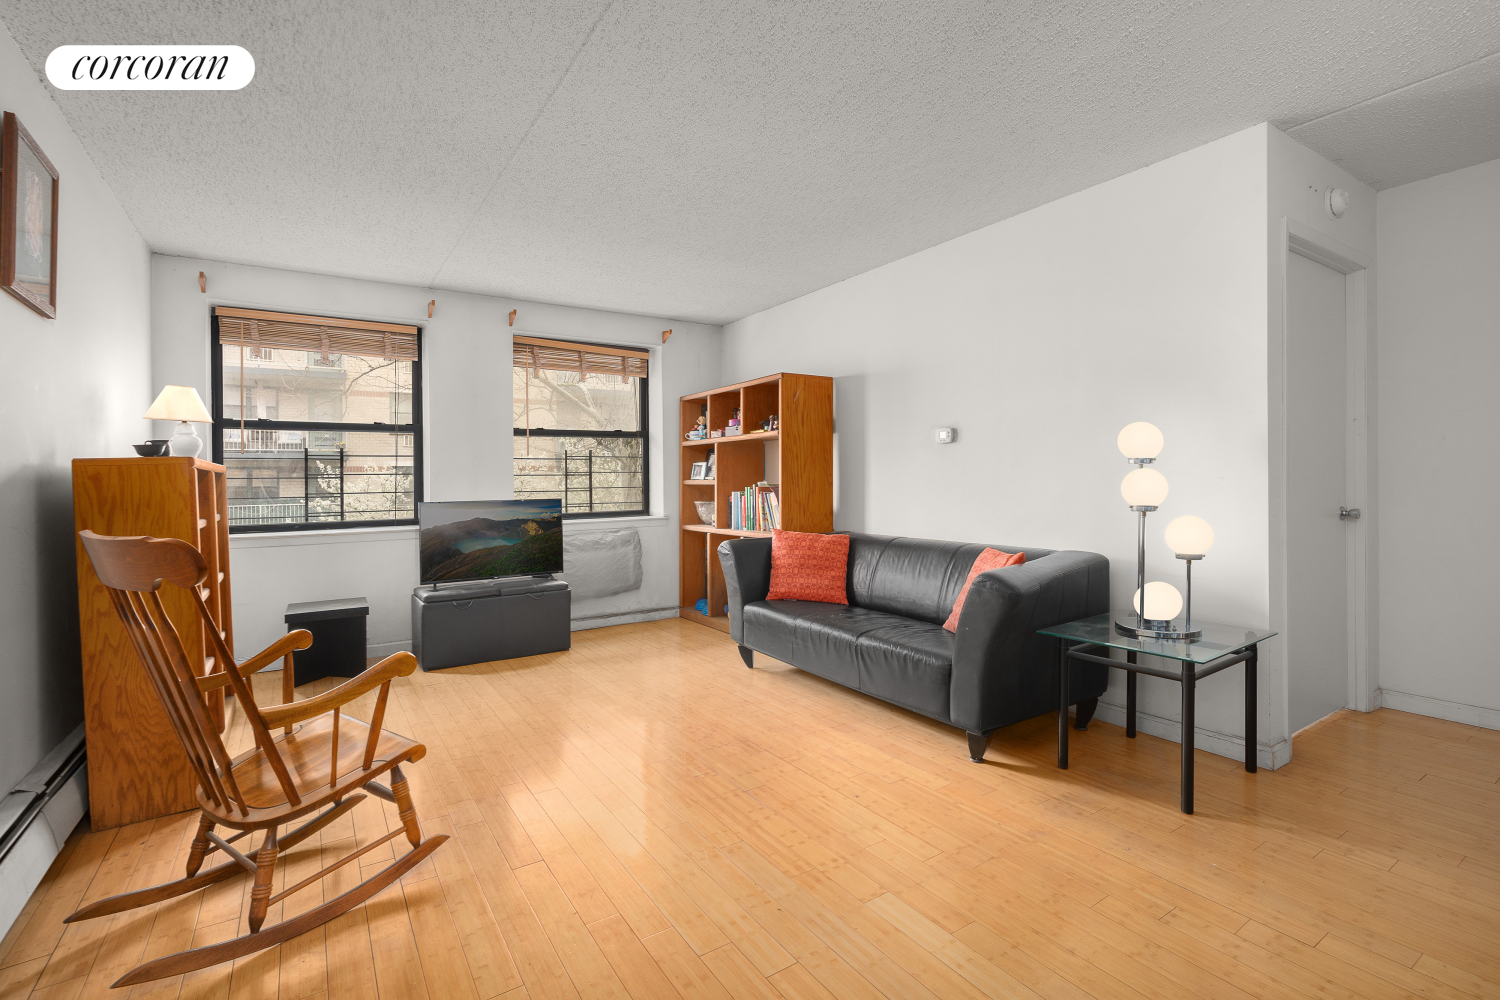 1901 Madison Avenue 310, South Harlem, Upper Manhattan, NYC - 2 Bedrooms  
1 Bathrooms  
4 Rooms - 